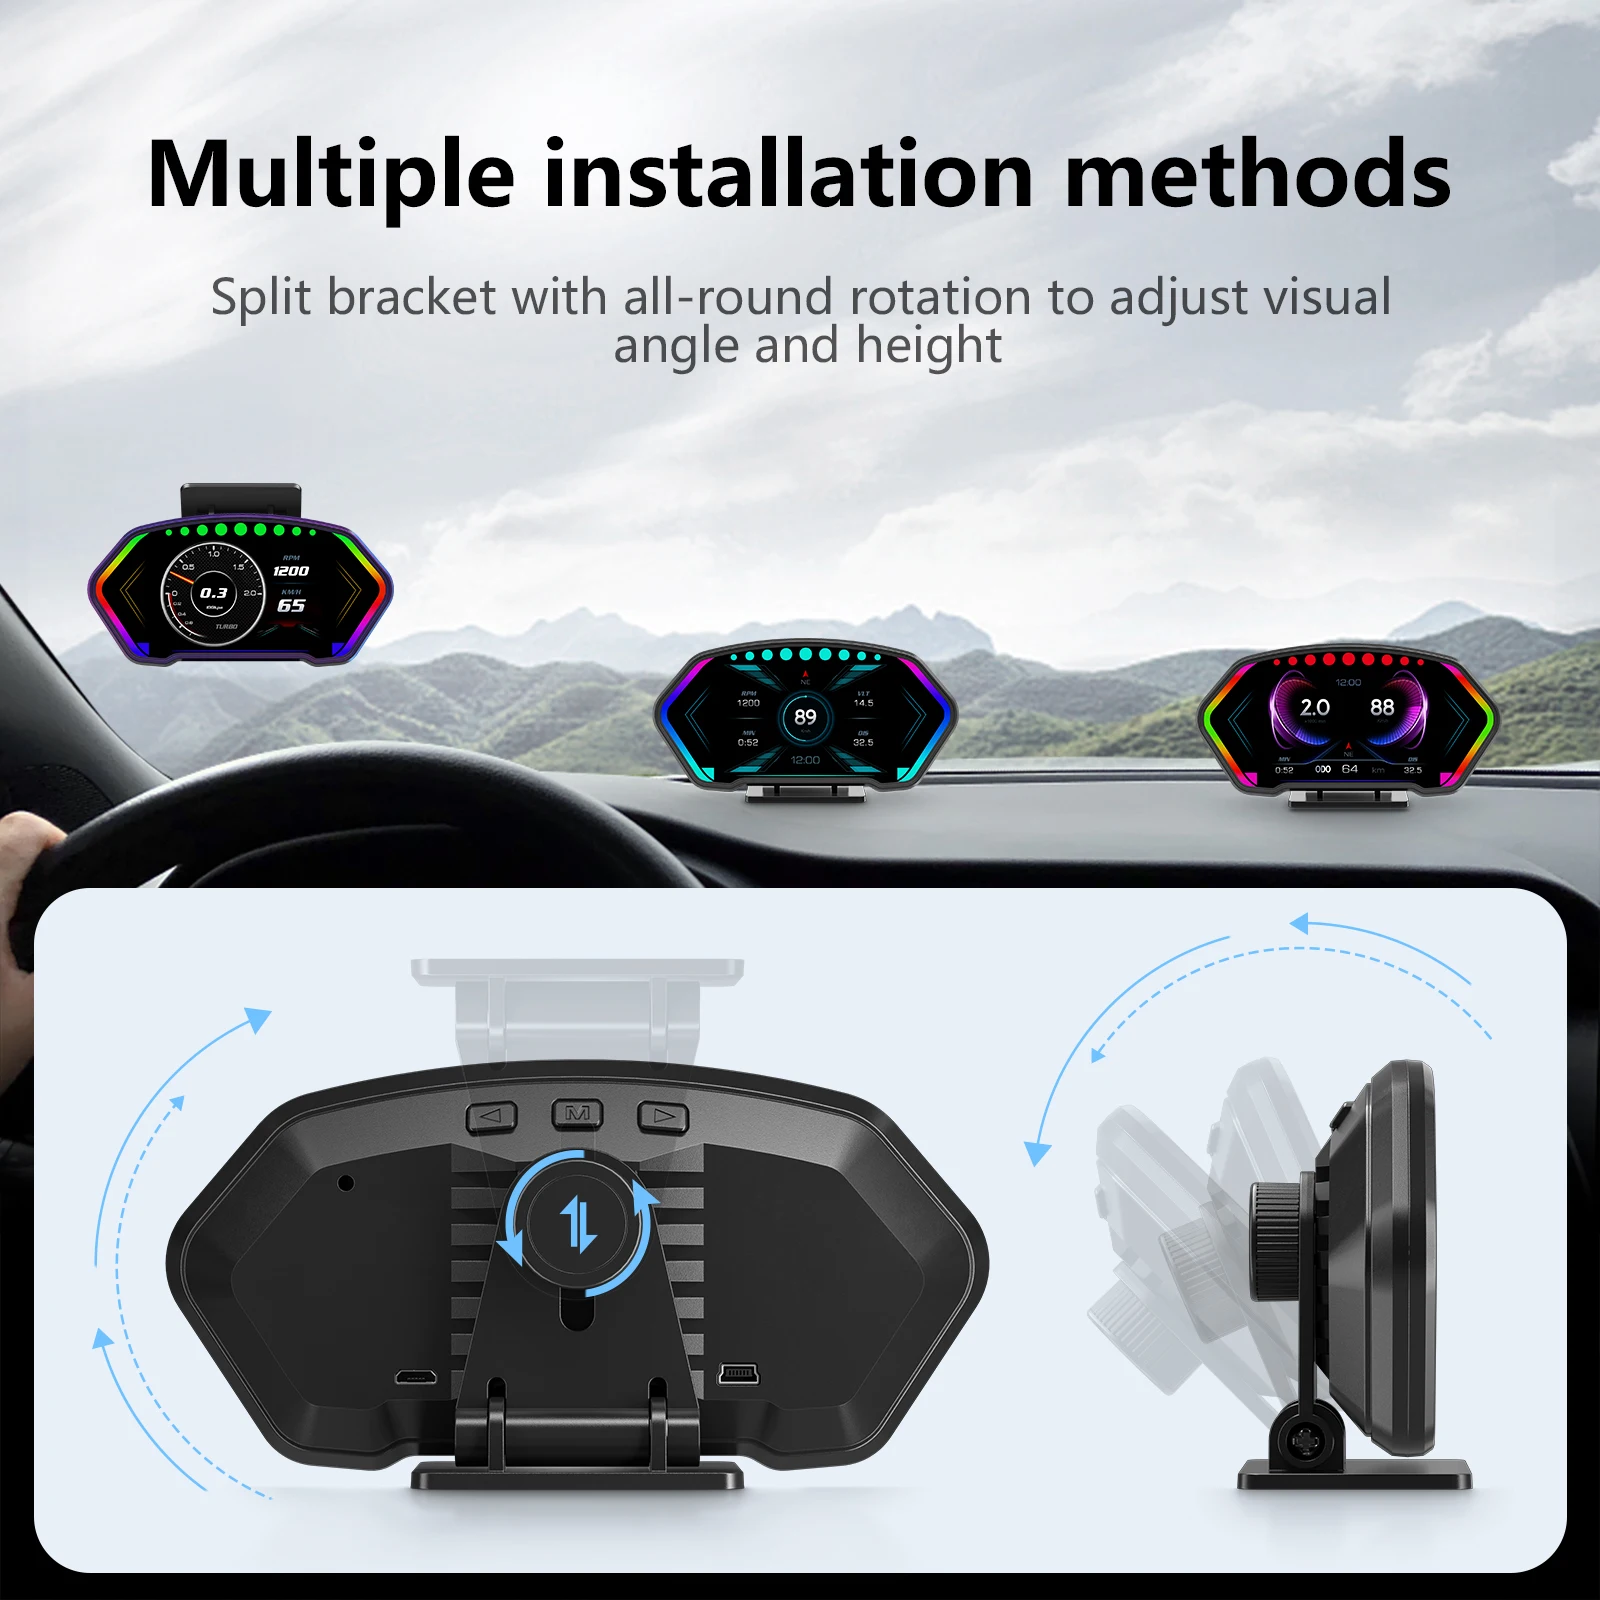 P3 Car HUD Head-up 6-inch High Definition LCD Screen OBD+GPS Dual System Slope Meter 36 Functions 9 Alarm Car Accessory